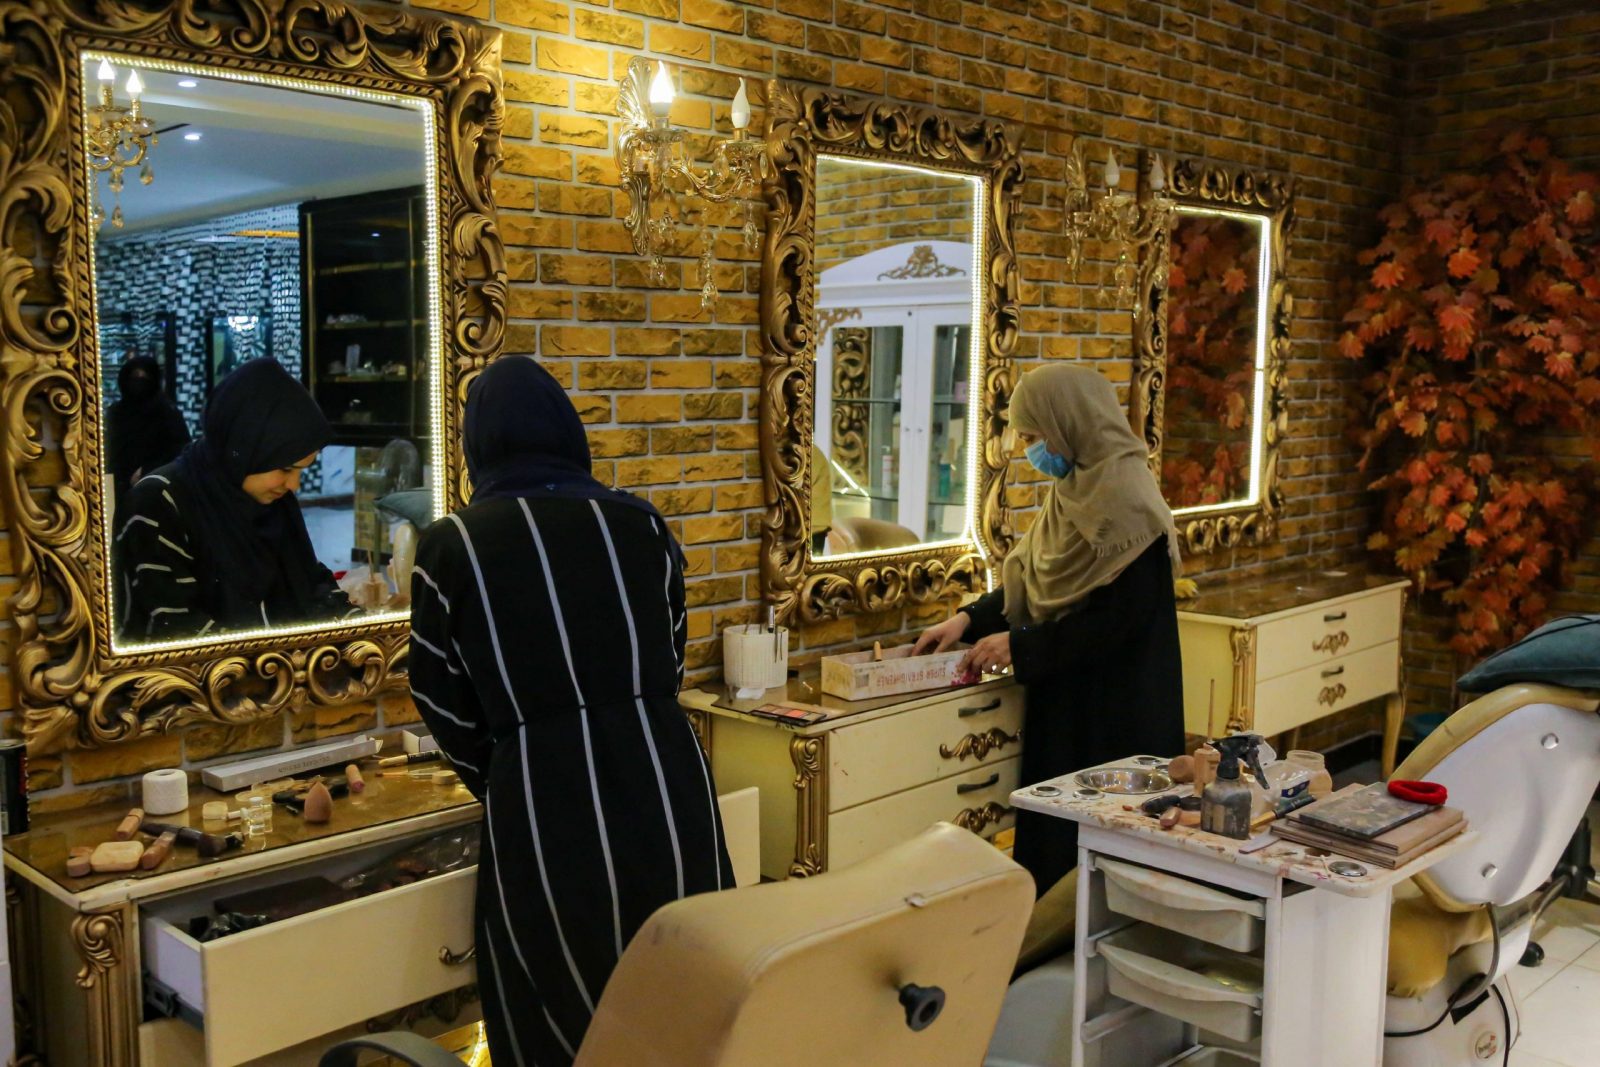 epa10726547 Staff prepare to leave after closing a beauty salon in Kabul, Afghanistan, 04 July 2023. The Taliban government has in a recent decree imposed a ban on women’s beauty salons in Afghanistan, that will effect some 12,000 hairdressing salons according to the Kabul Chamber Of Craftsmen. The Ministry for the Propagation of Virtue and the Prevention of Vice on 04 July confirmed that beauty parlors were ordered to wind down their businesses within a month in Kabul and all 33 Afghan provinces.  EPA/SAMIULLAH POPAL